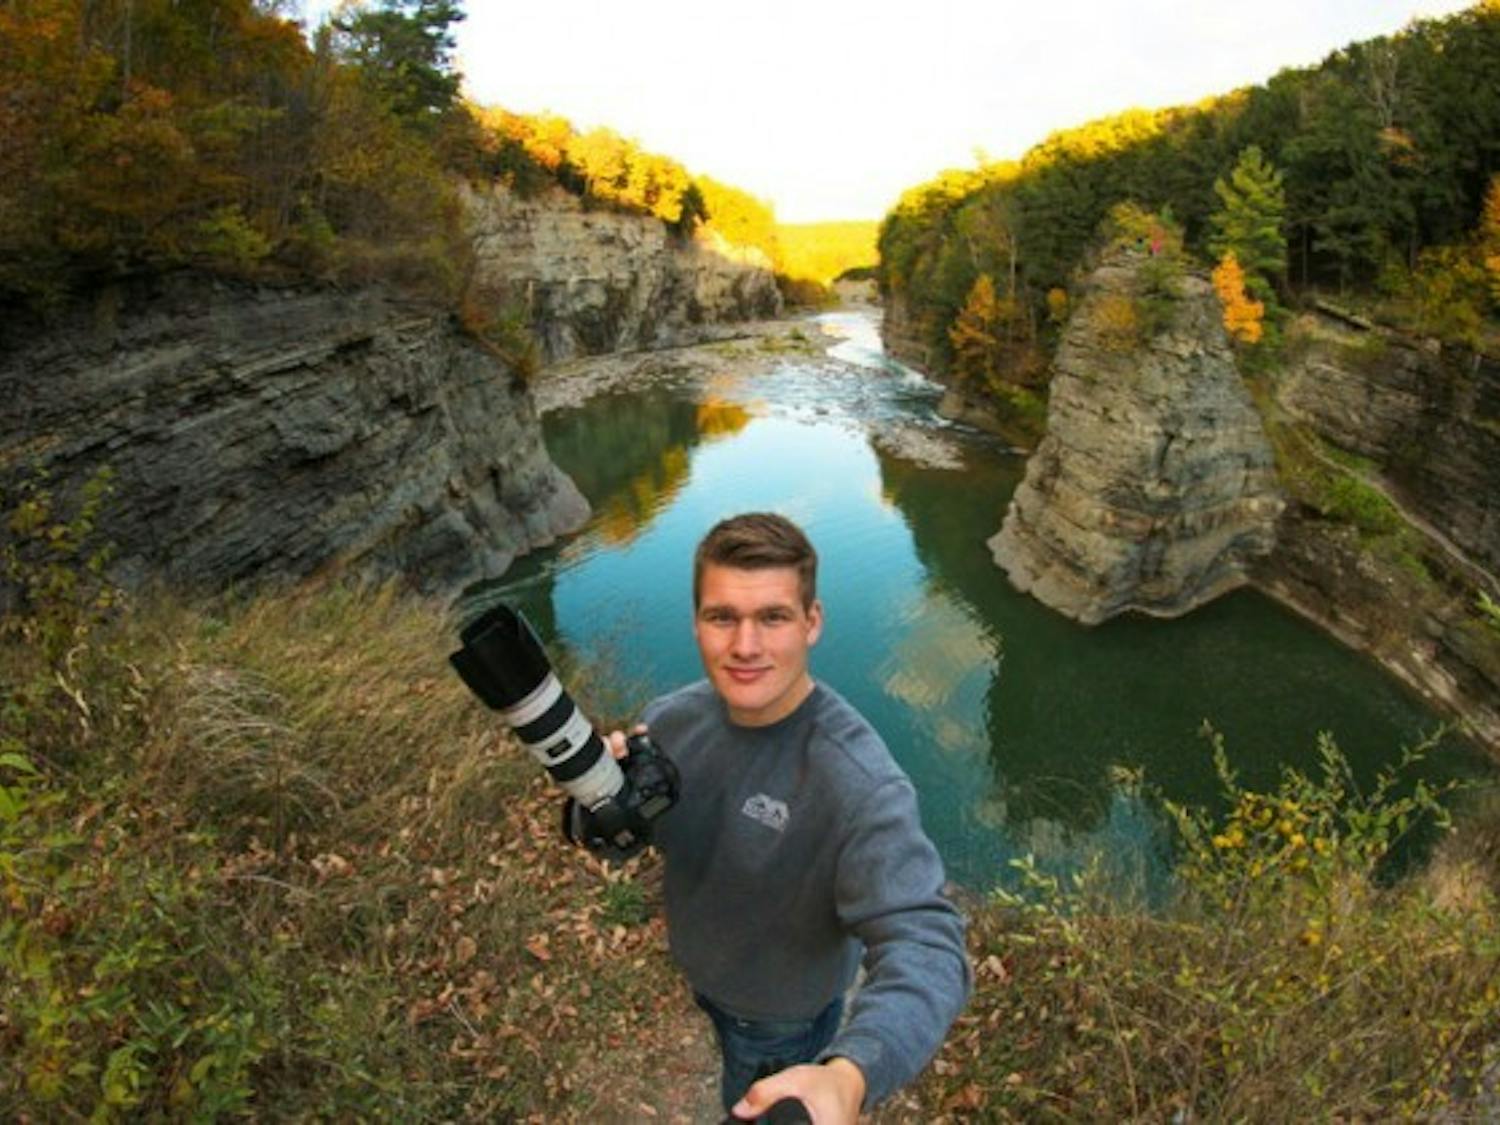 Senior Photo Editor Chad Cooper escaped to Letchworth State Park over the weekend.
Chad Cooper, The Spectrum